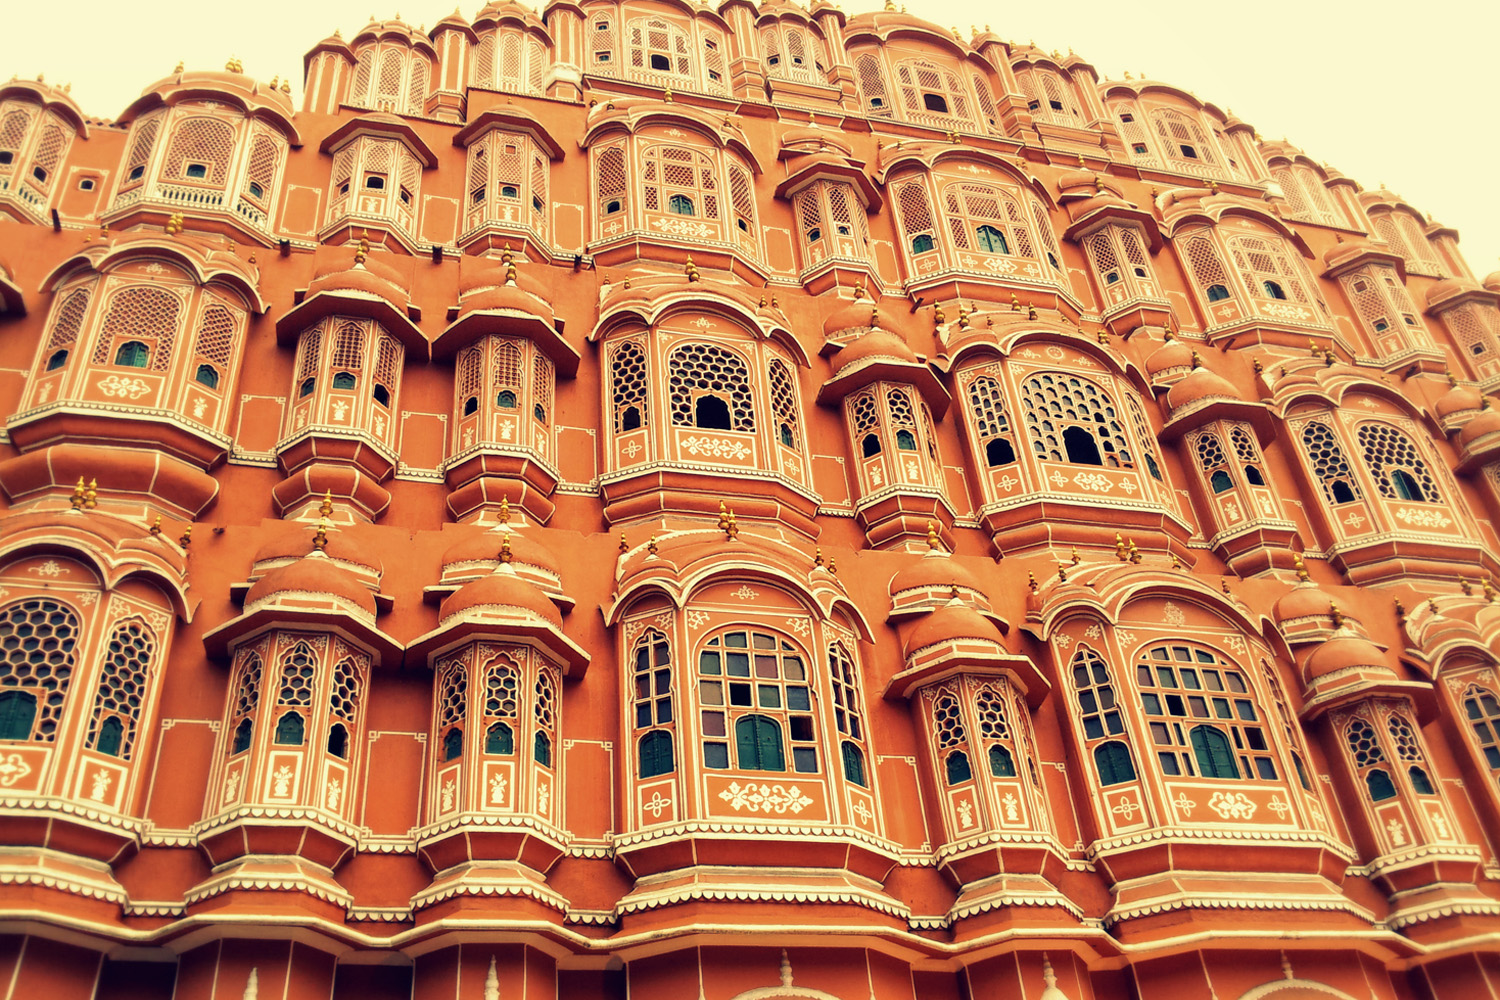 Explore Jaipur In 2 Days - The Complete Guide